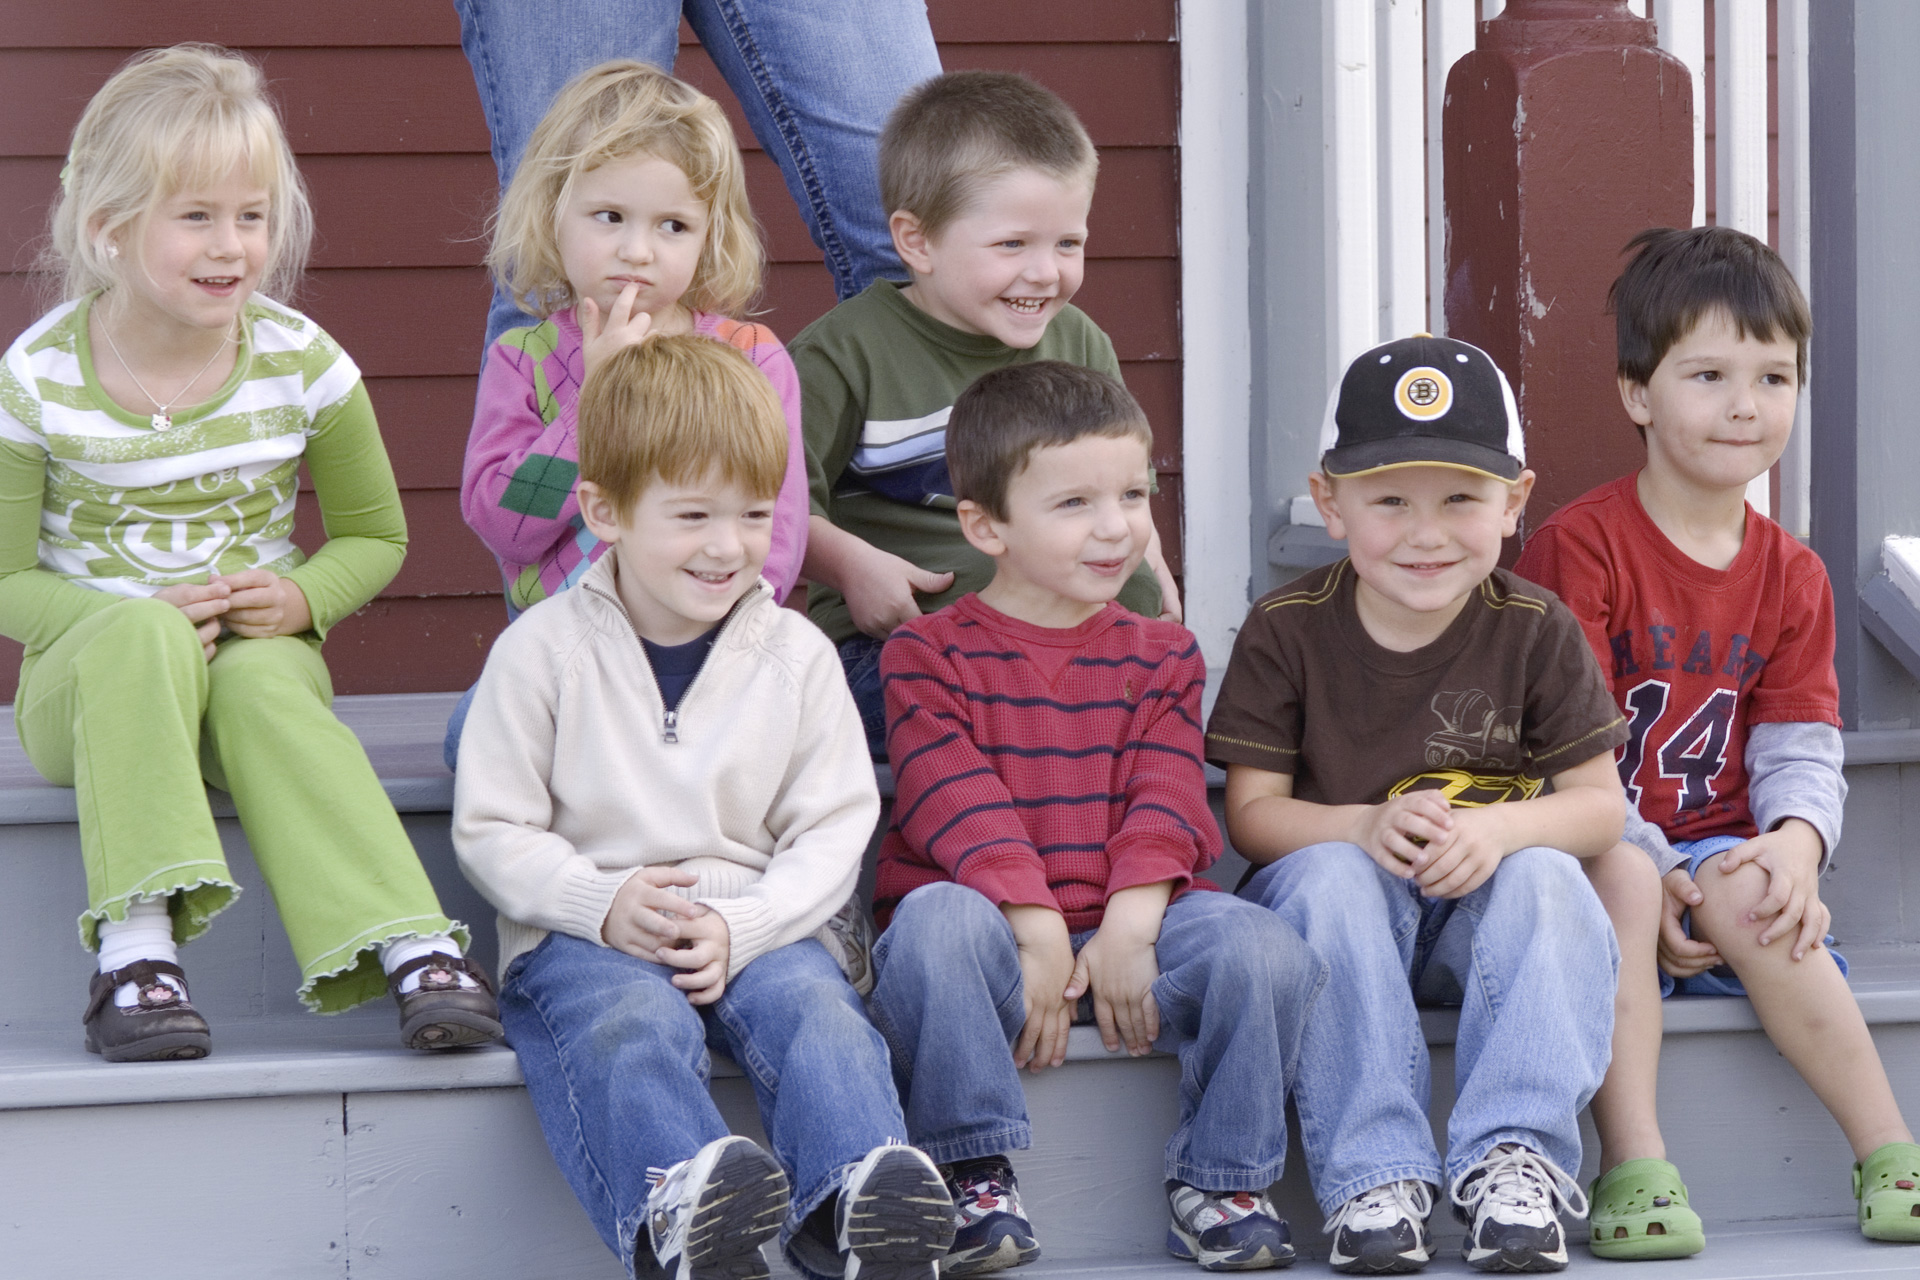 A small group of children sit on the stairs of their school